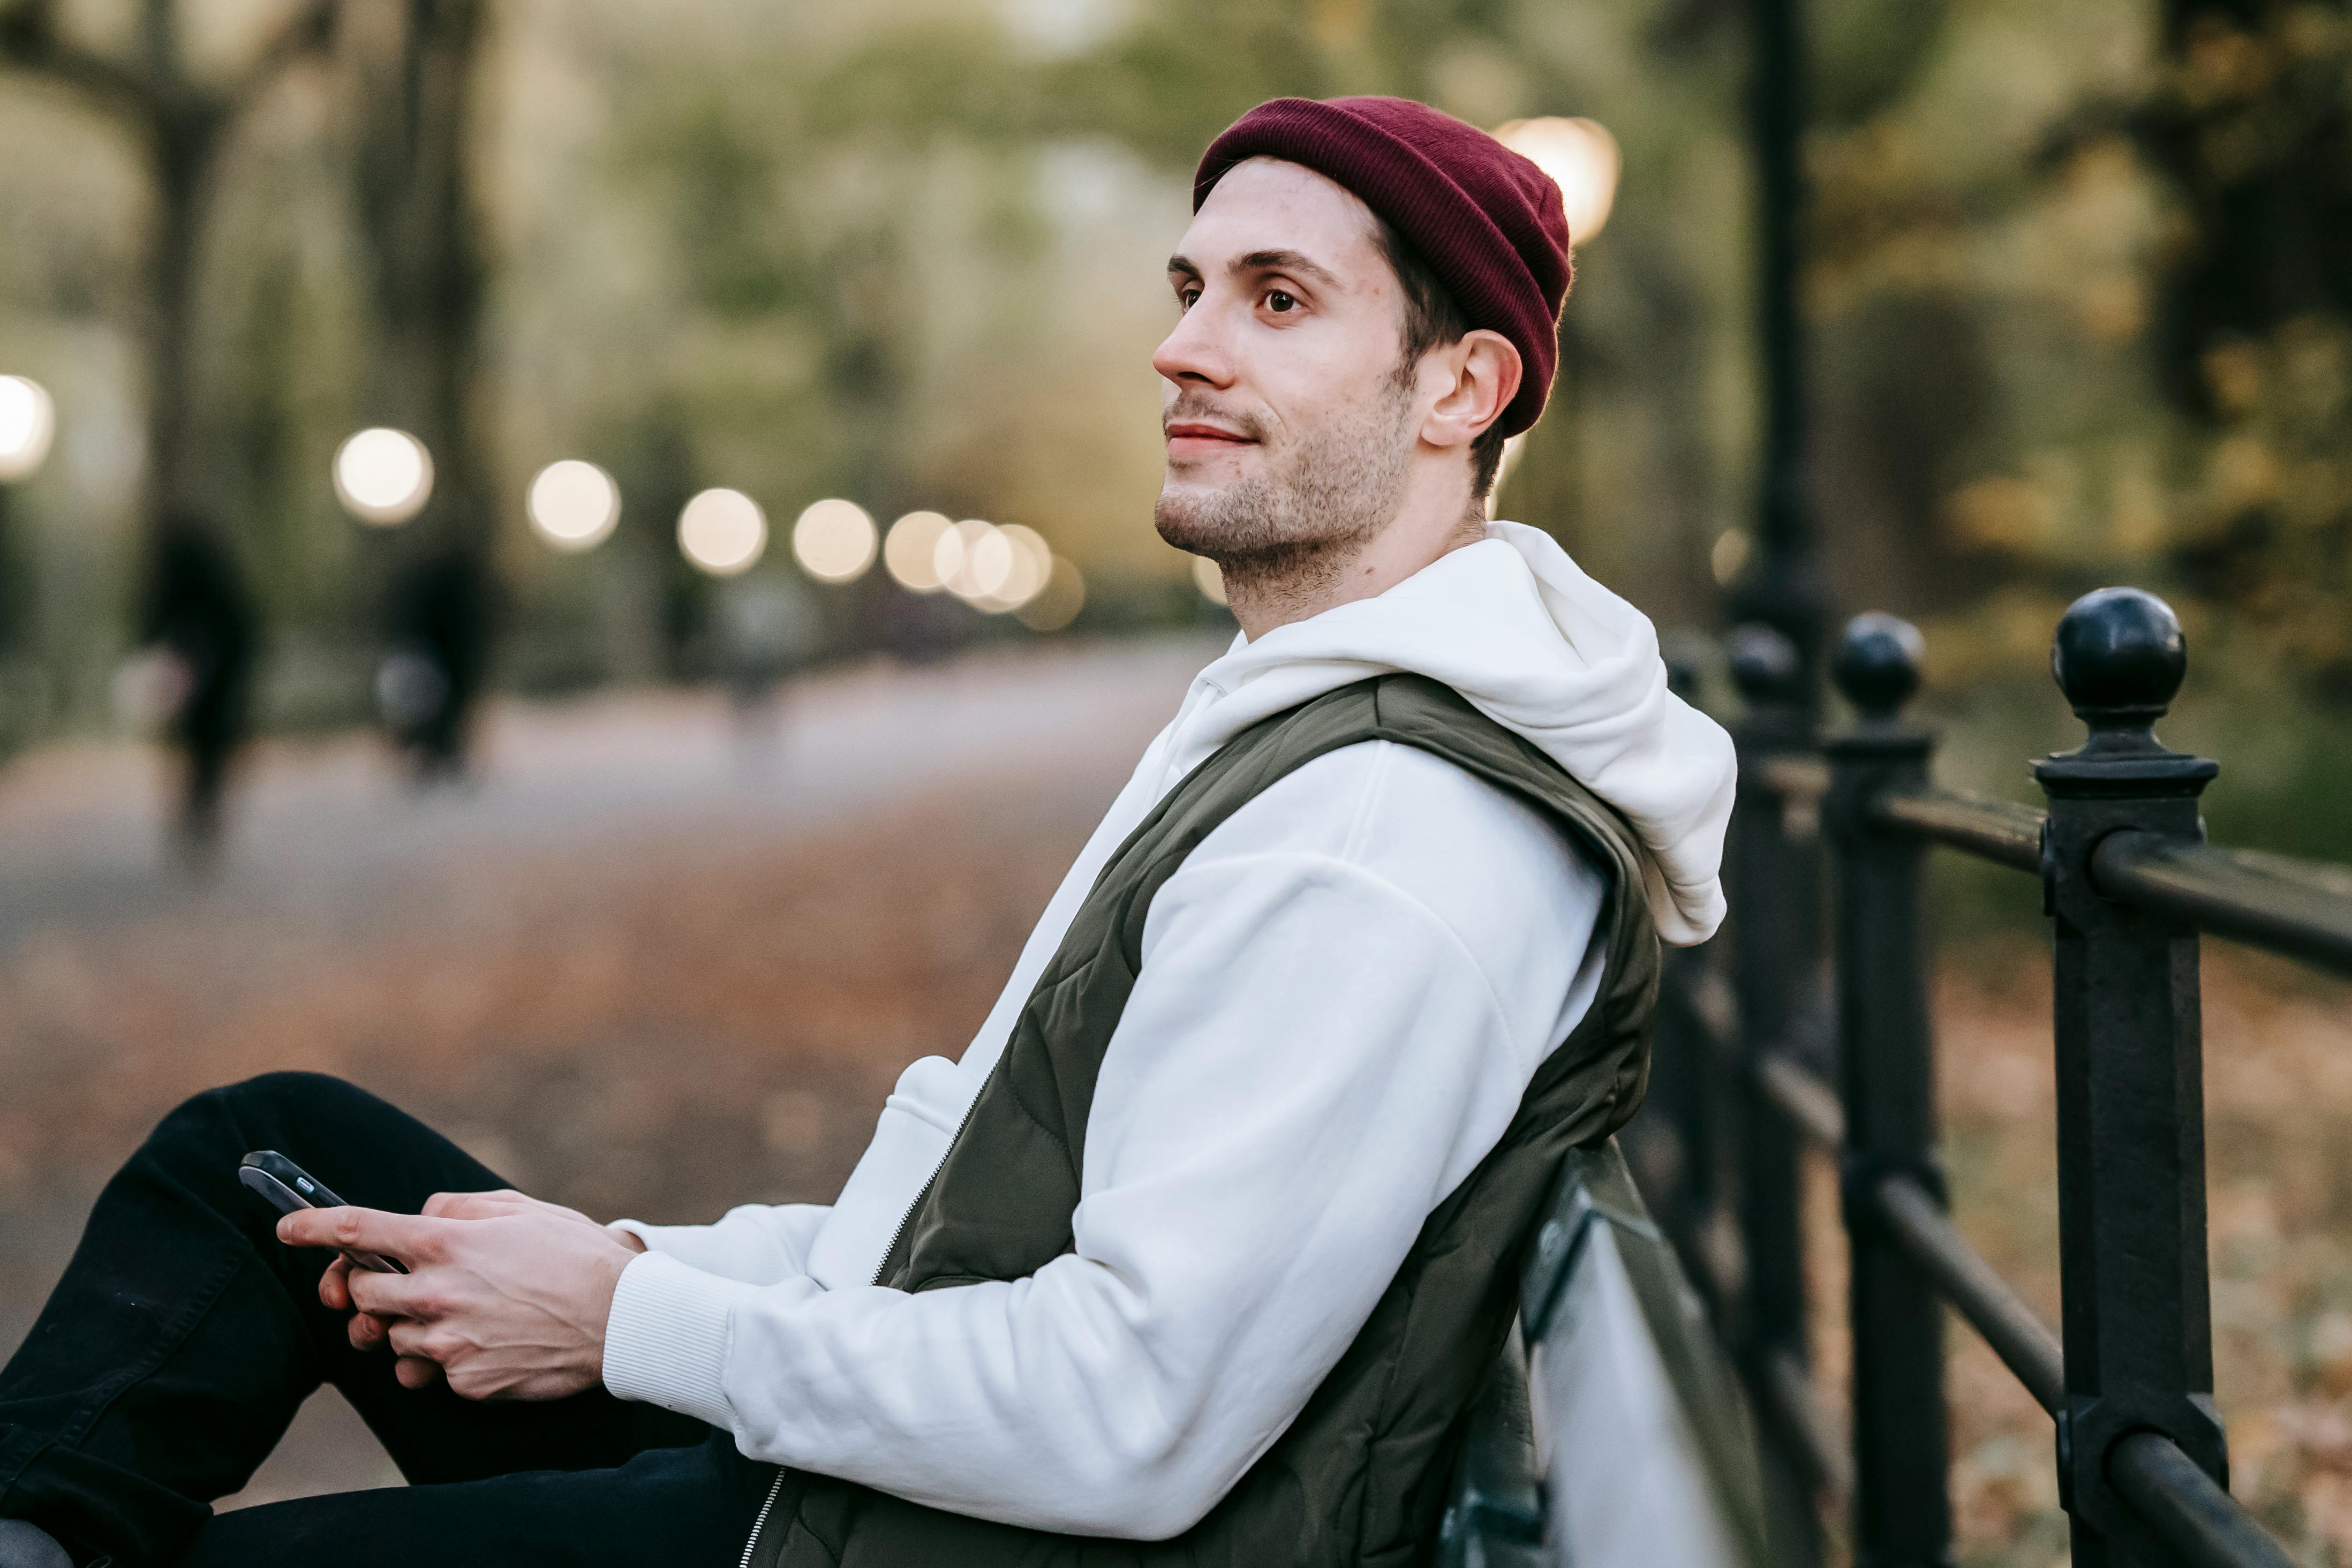 A happy man hanging out at a park with his phone in his hand | Source: Pexels